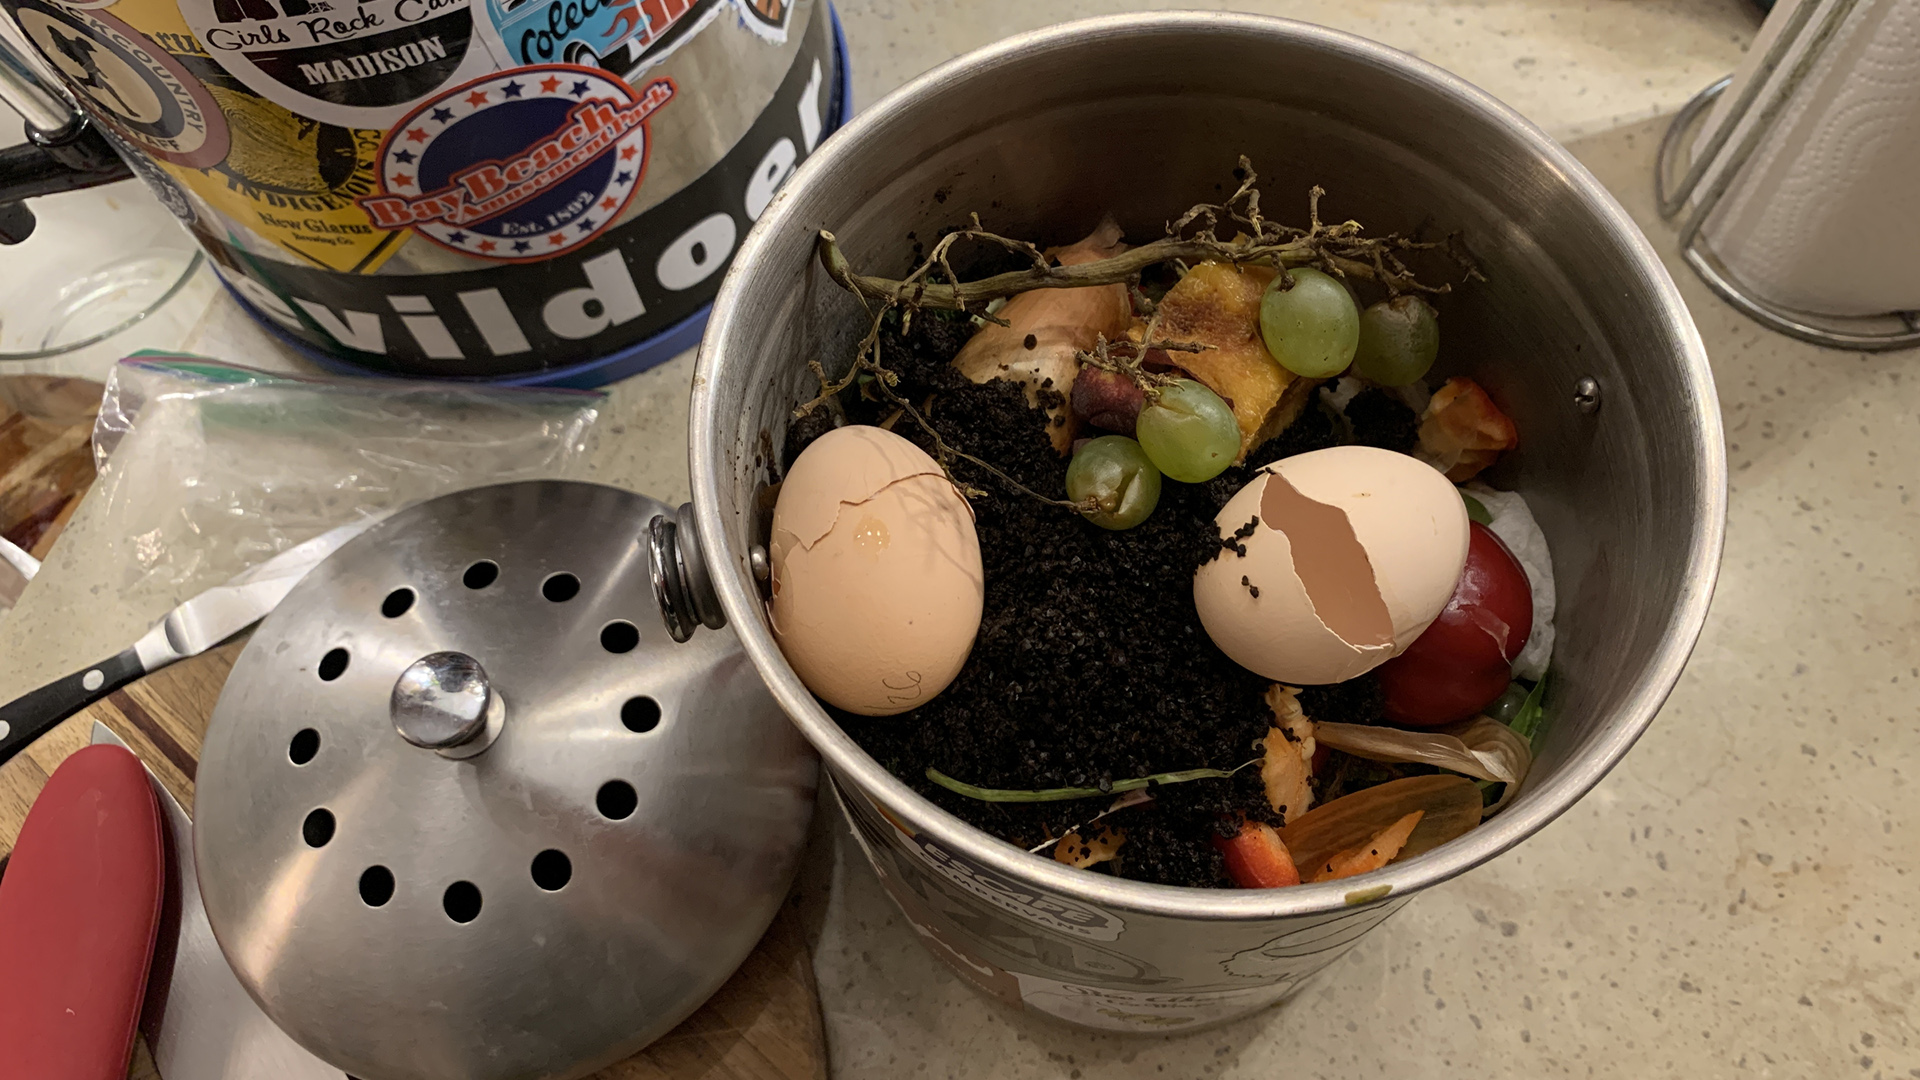 Egg shells, coffee grounds, grape stems and other items sit in a metal bucket placed on a countertop next to another bucket and other kitchen items.